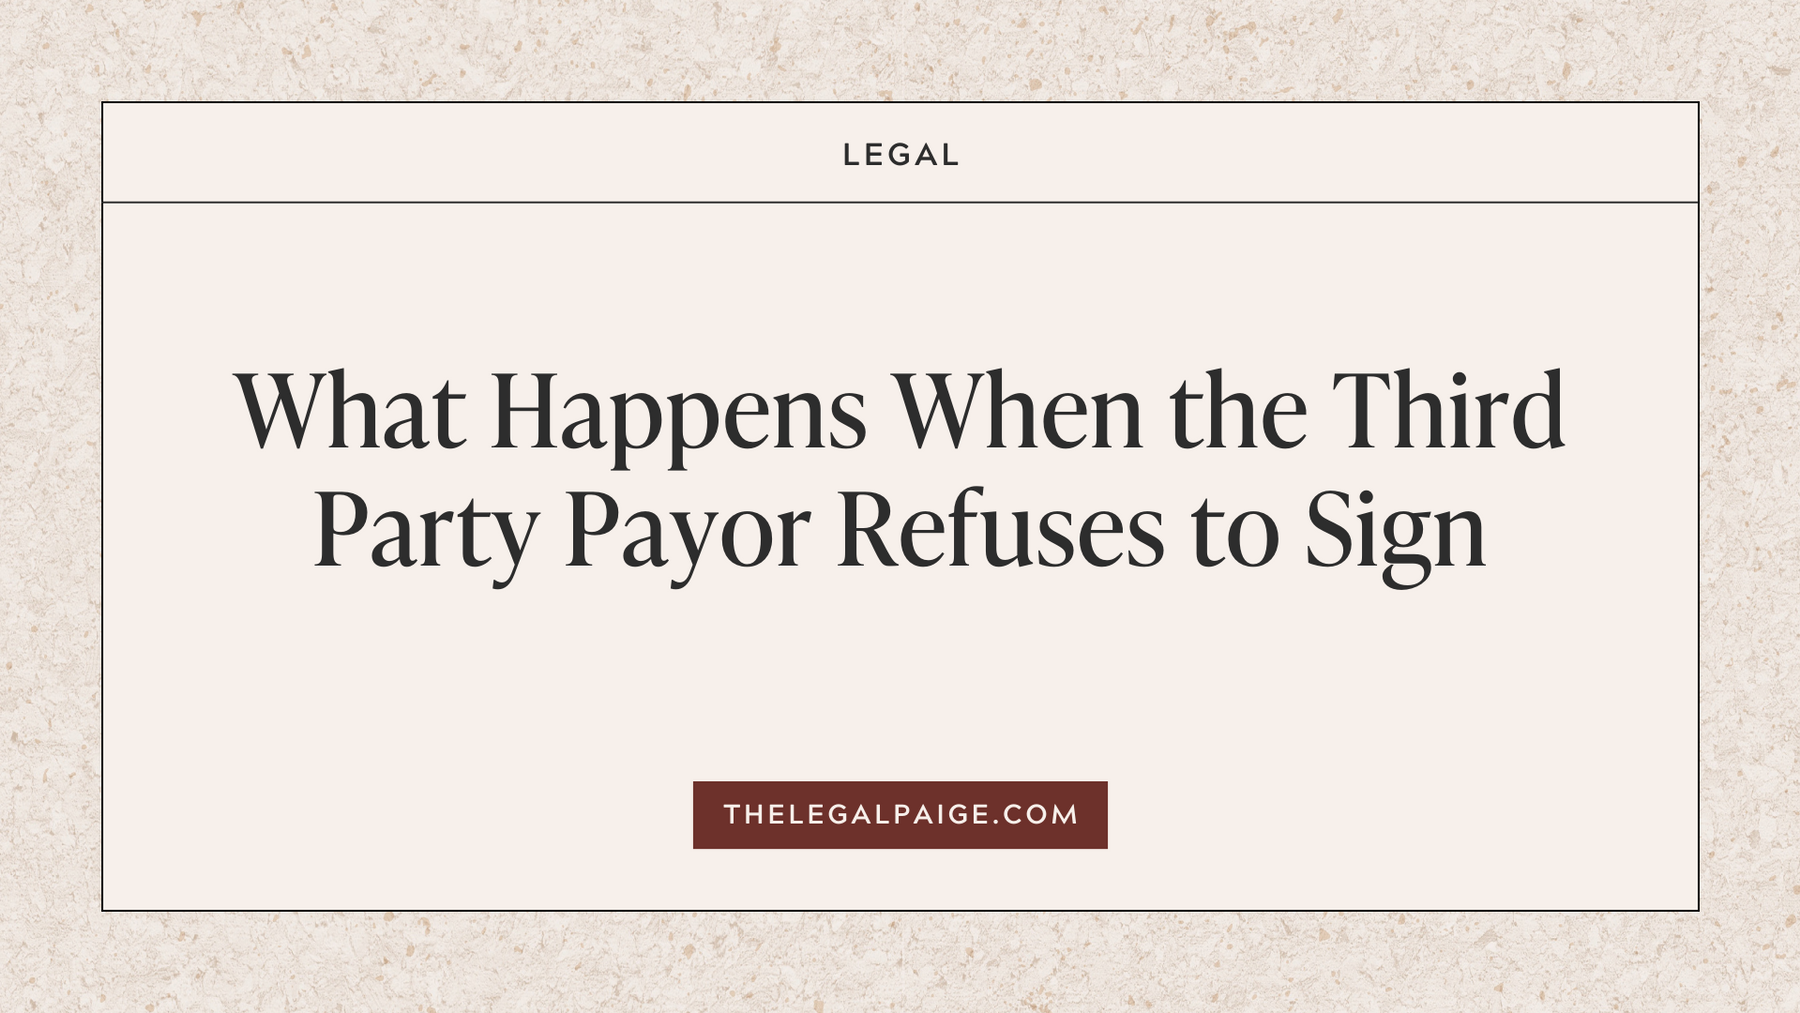 What Happens When The Third Party Payor Refuses to Sign?